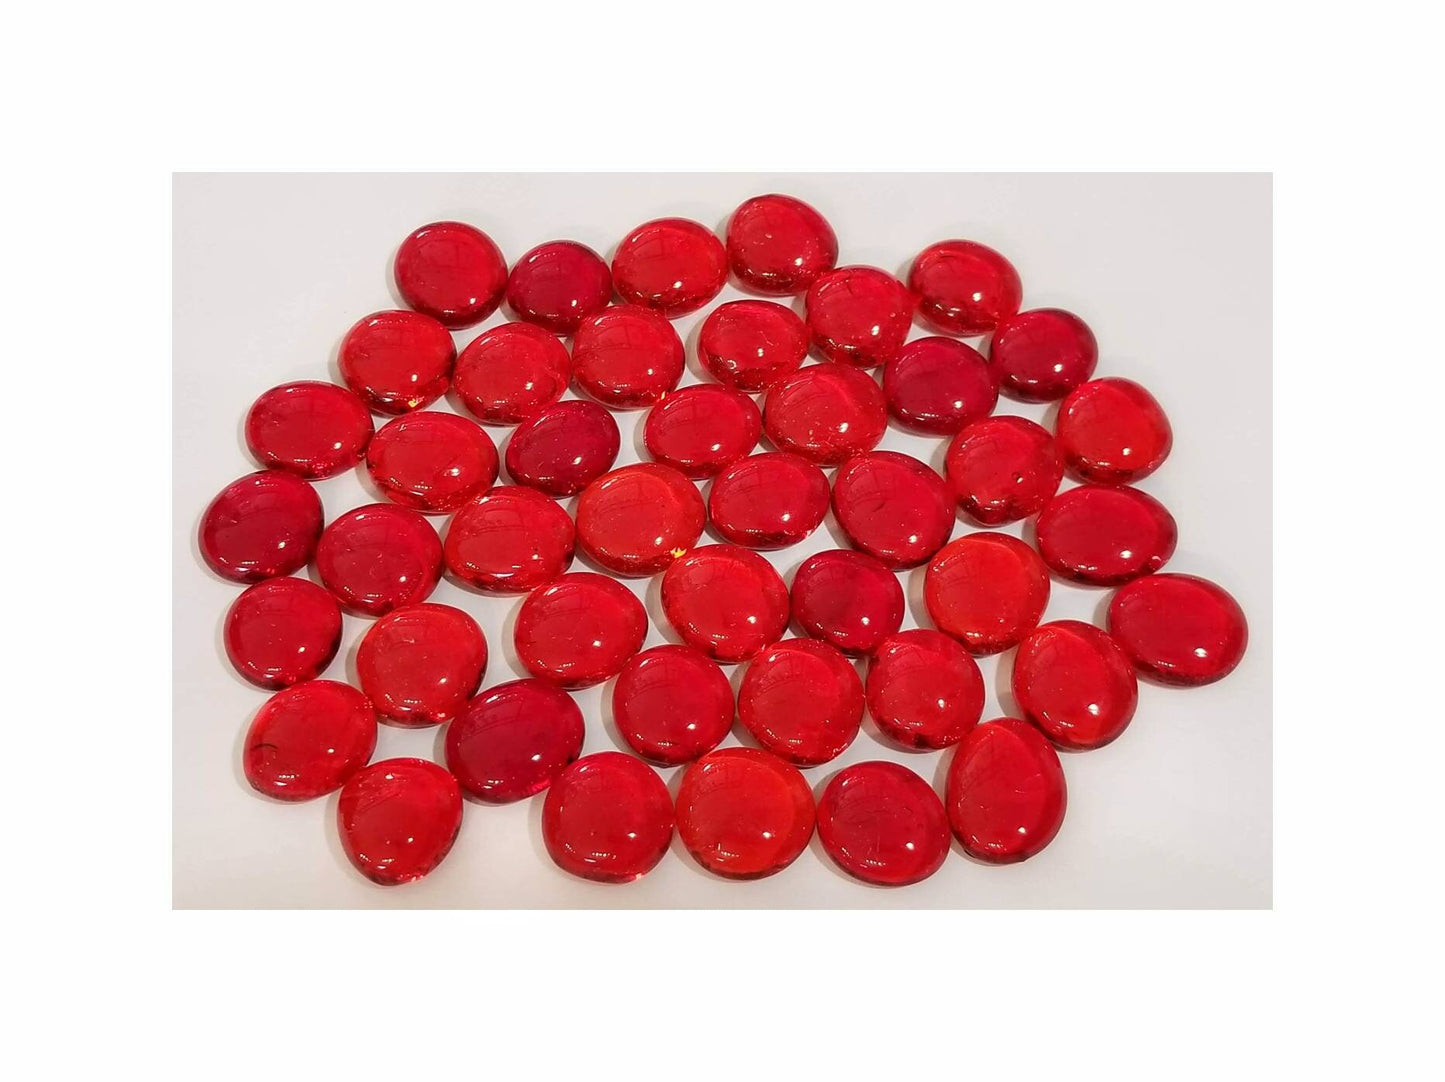 Lt. Red Glass Nuggets for Stained Glass. Stepping stones, mosaics, jewelry supply. Art & craft project. Medium Size. Holly Berry Vase Filler